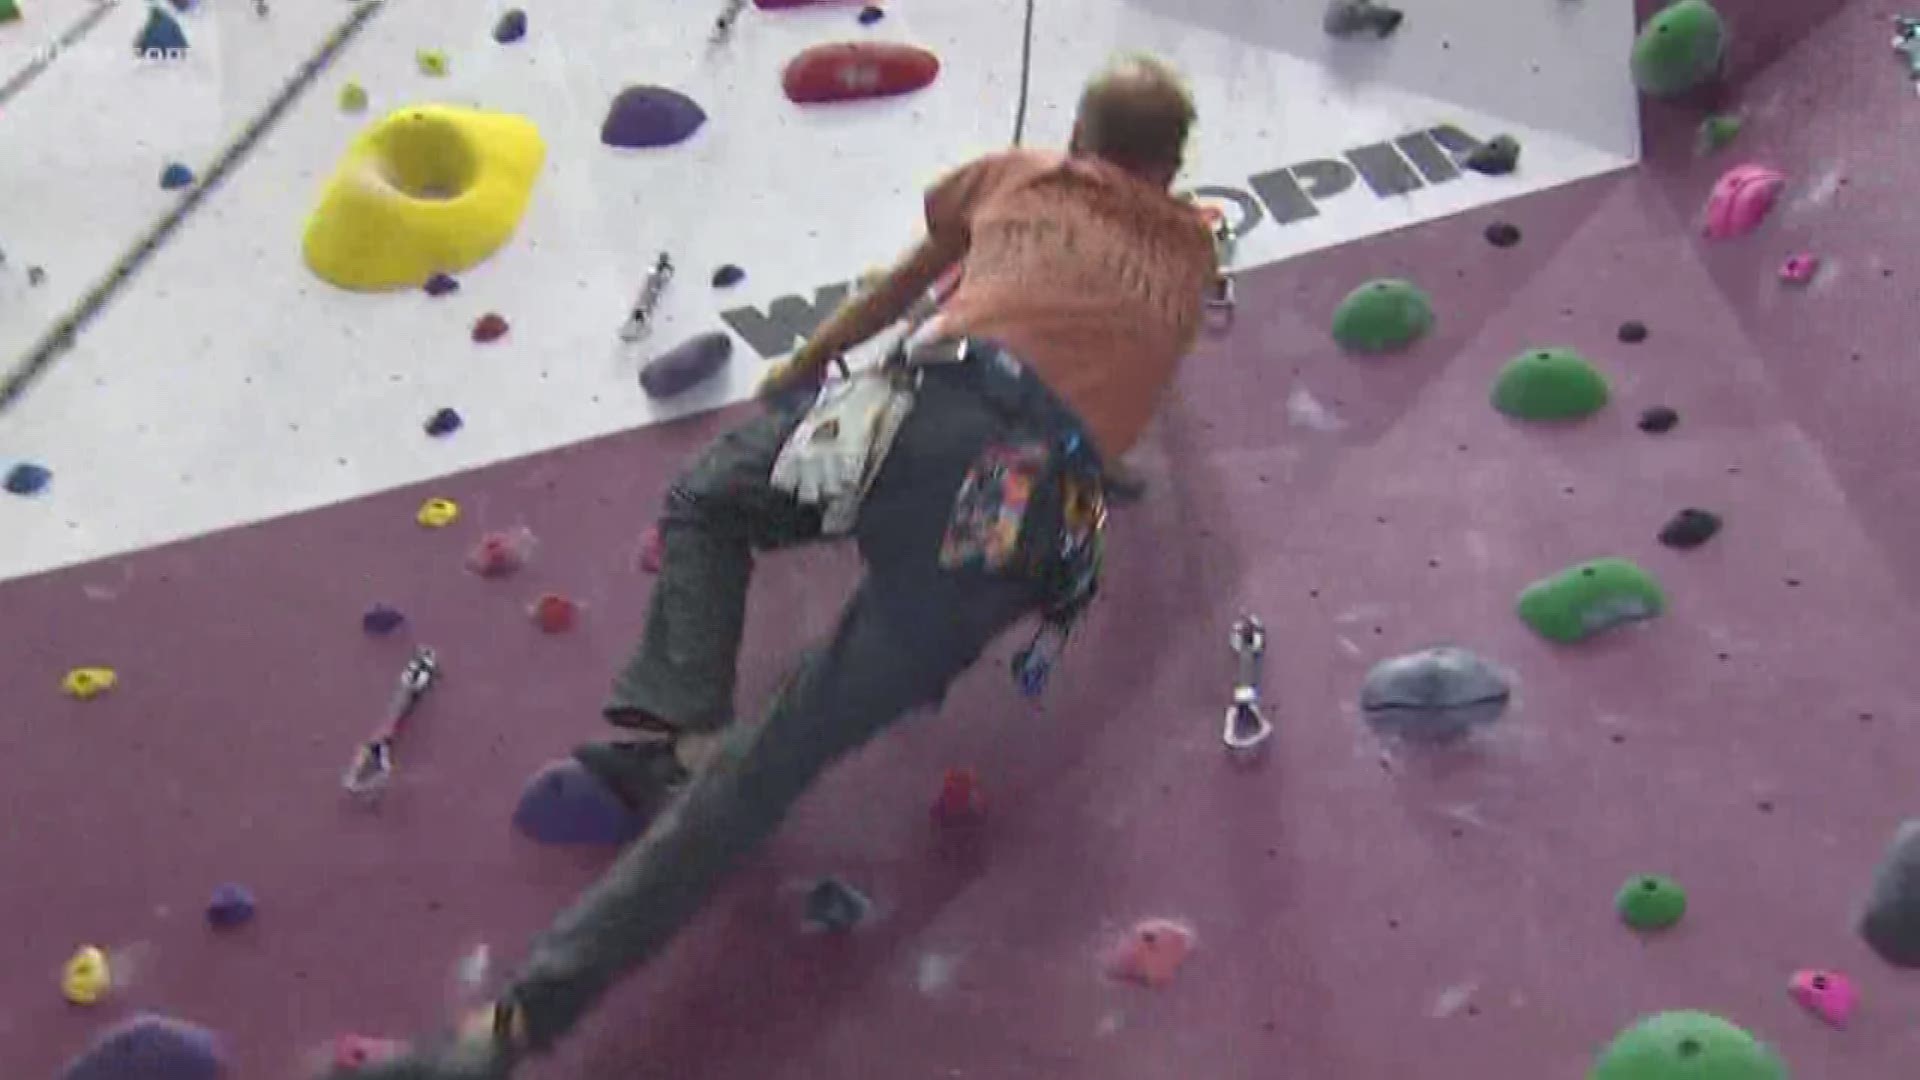 It is almost Memorial Day Weekend, and if you're looking for a way to get out of the heat, we have an idea for you. Our Ruben Galvan is rock climbing this morning indoors in Katy.